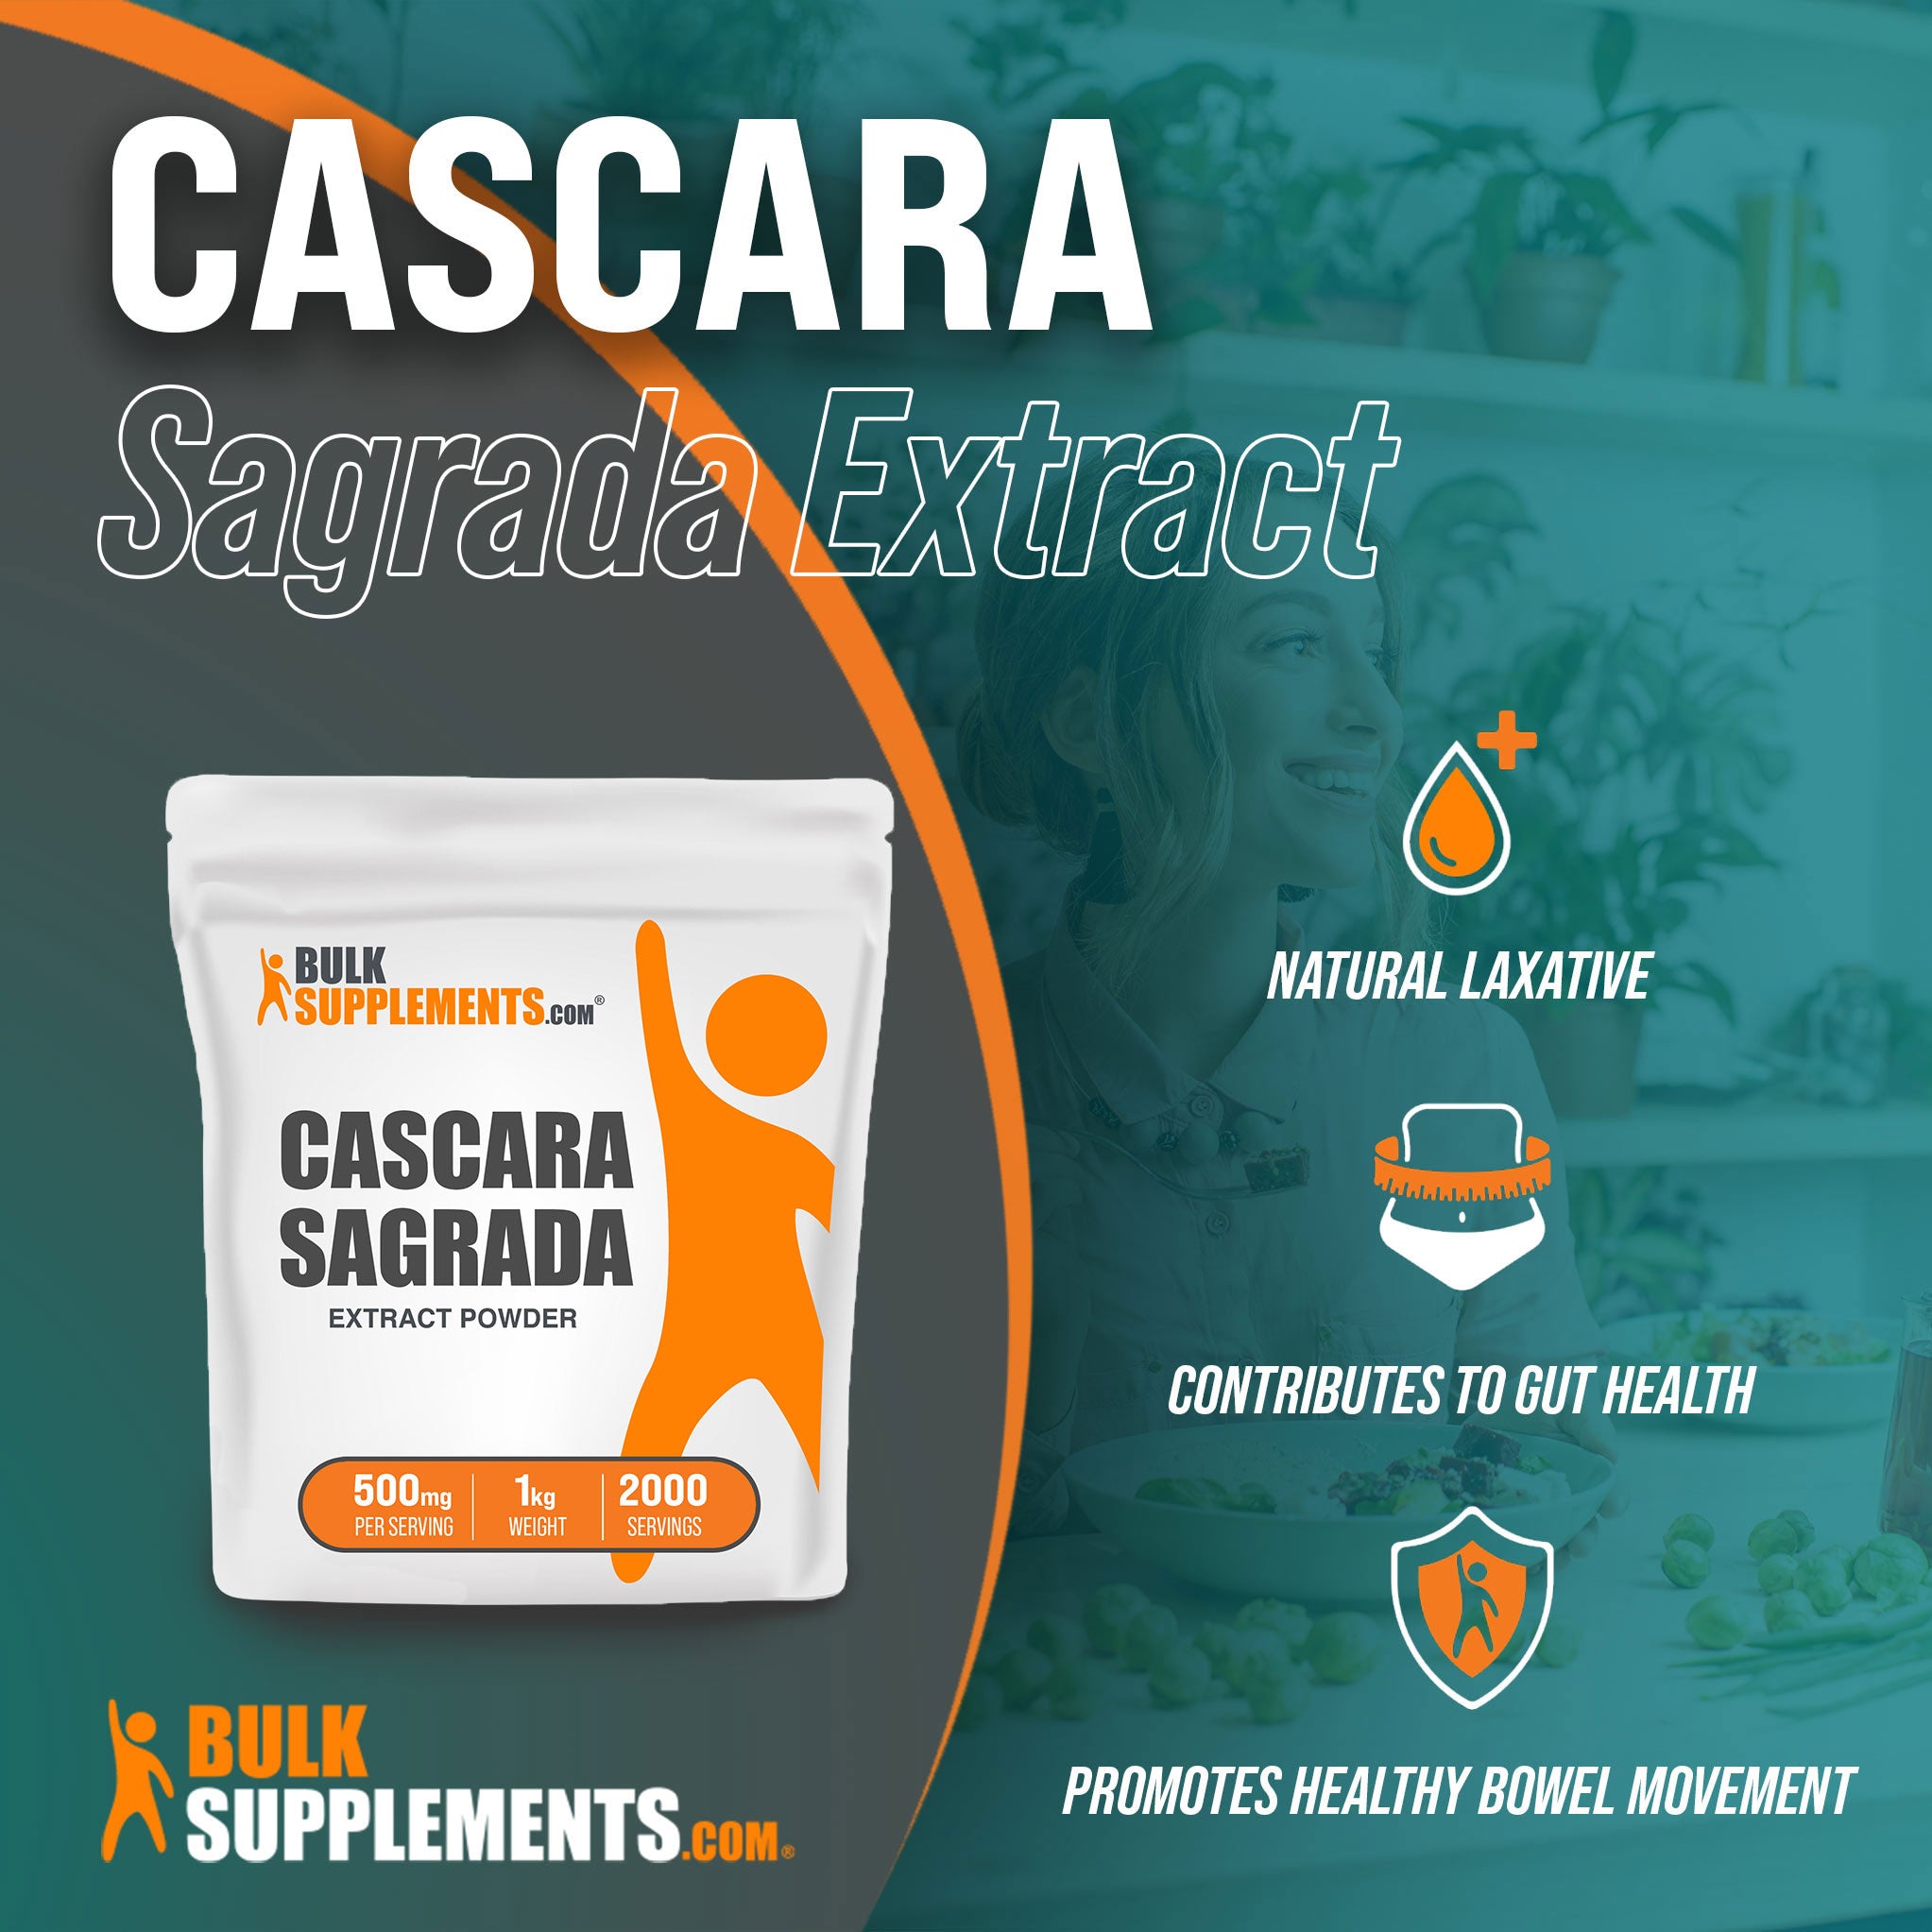 Benefits of Cascara Sagrada Extract; natural laxative, contributes to gut health, promotes healthy bowel movement